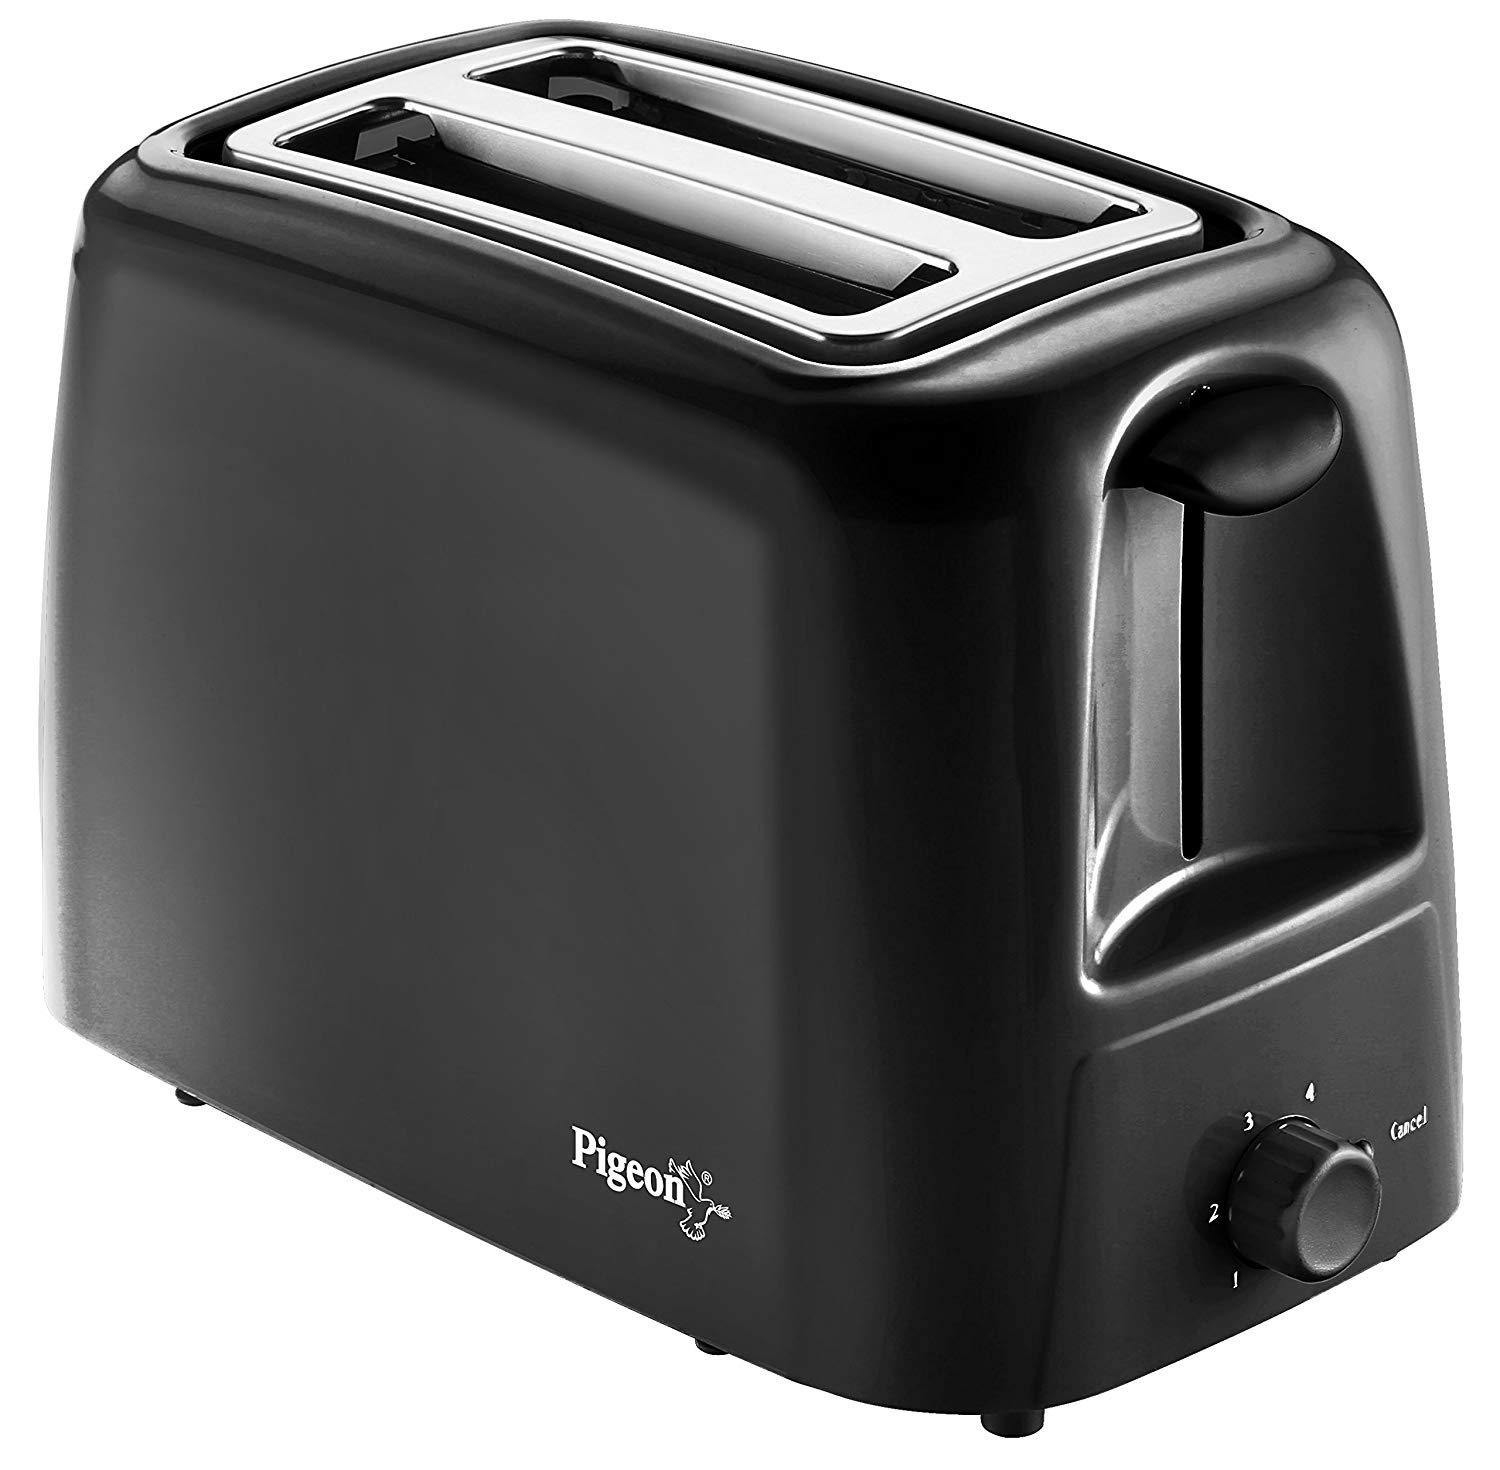 Pigeon Two Slice Auto Pop-up Toaster